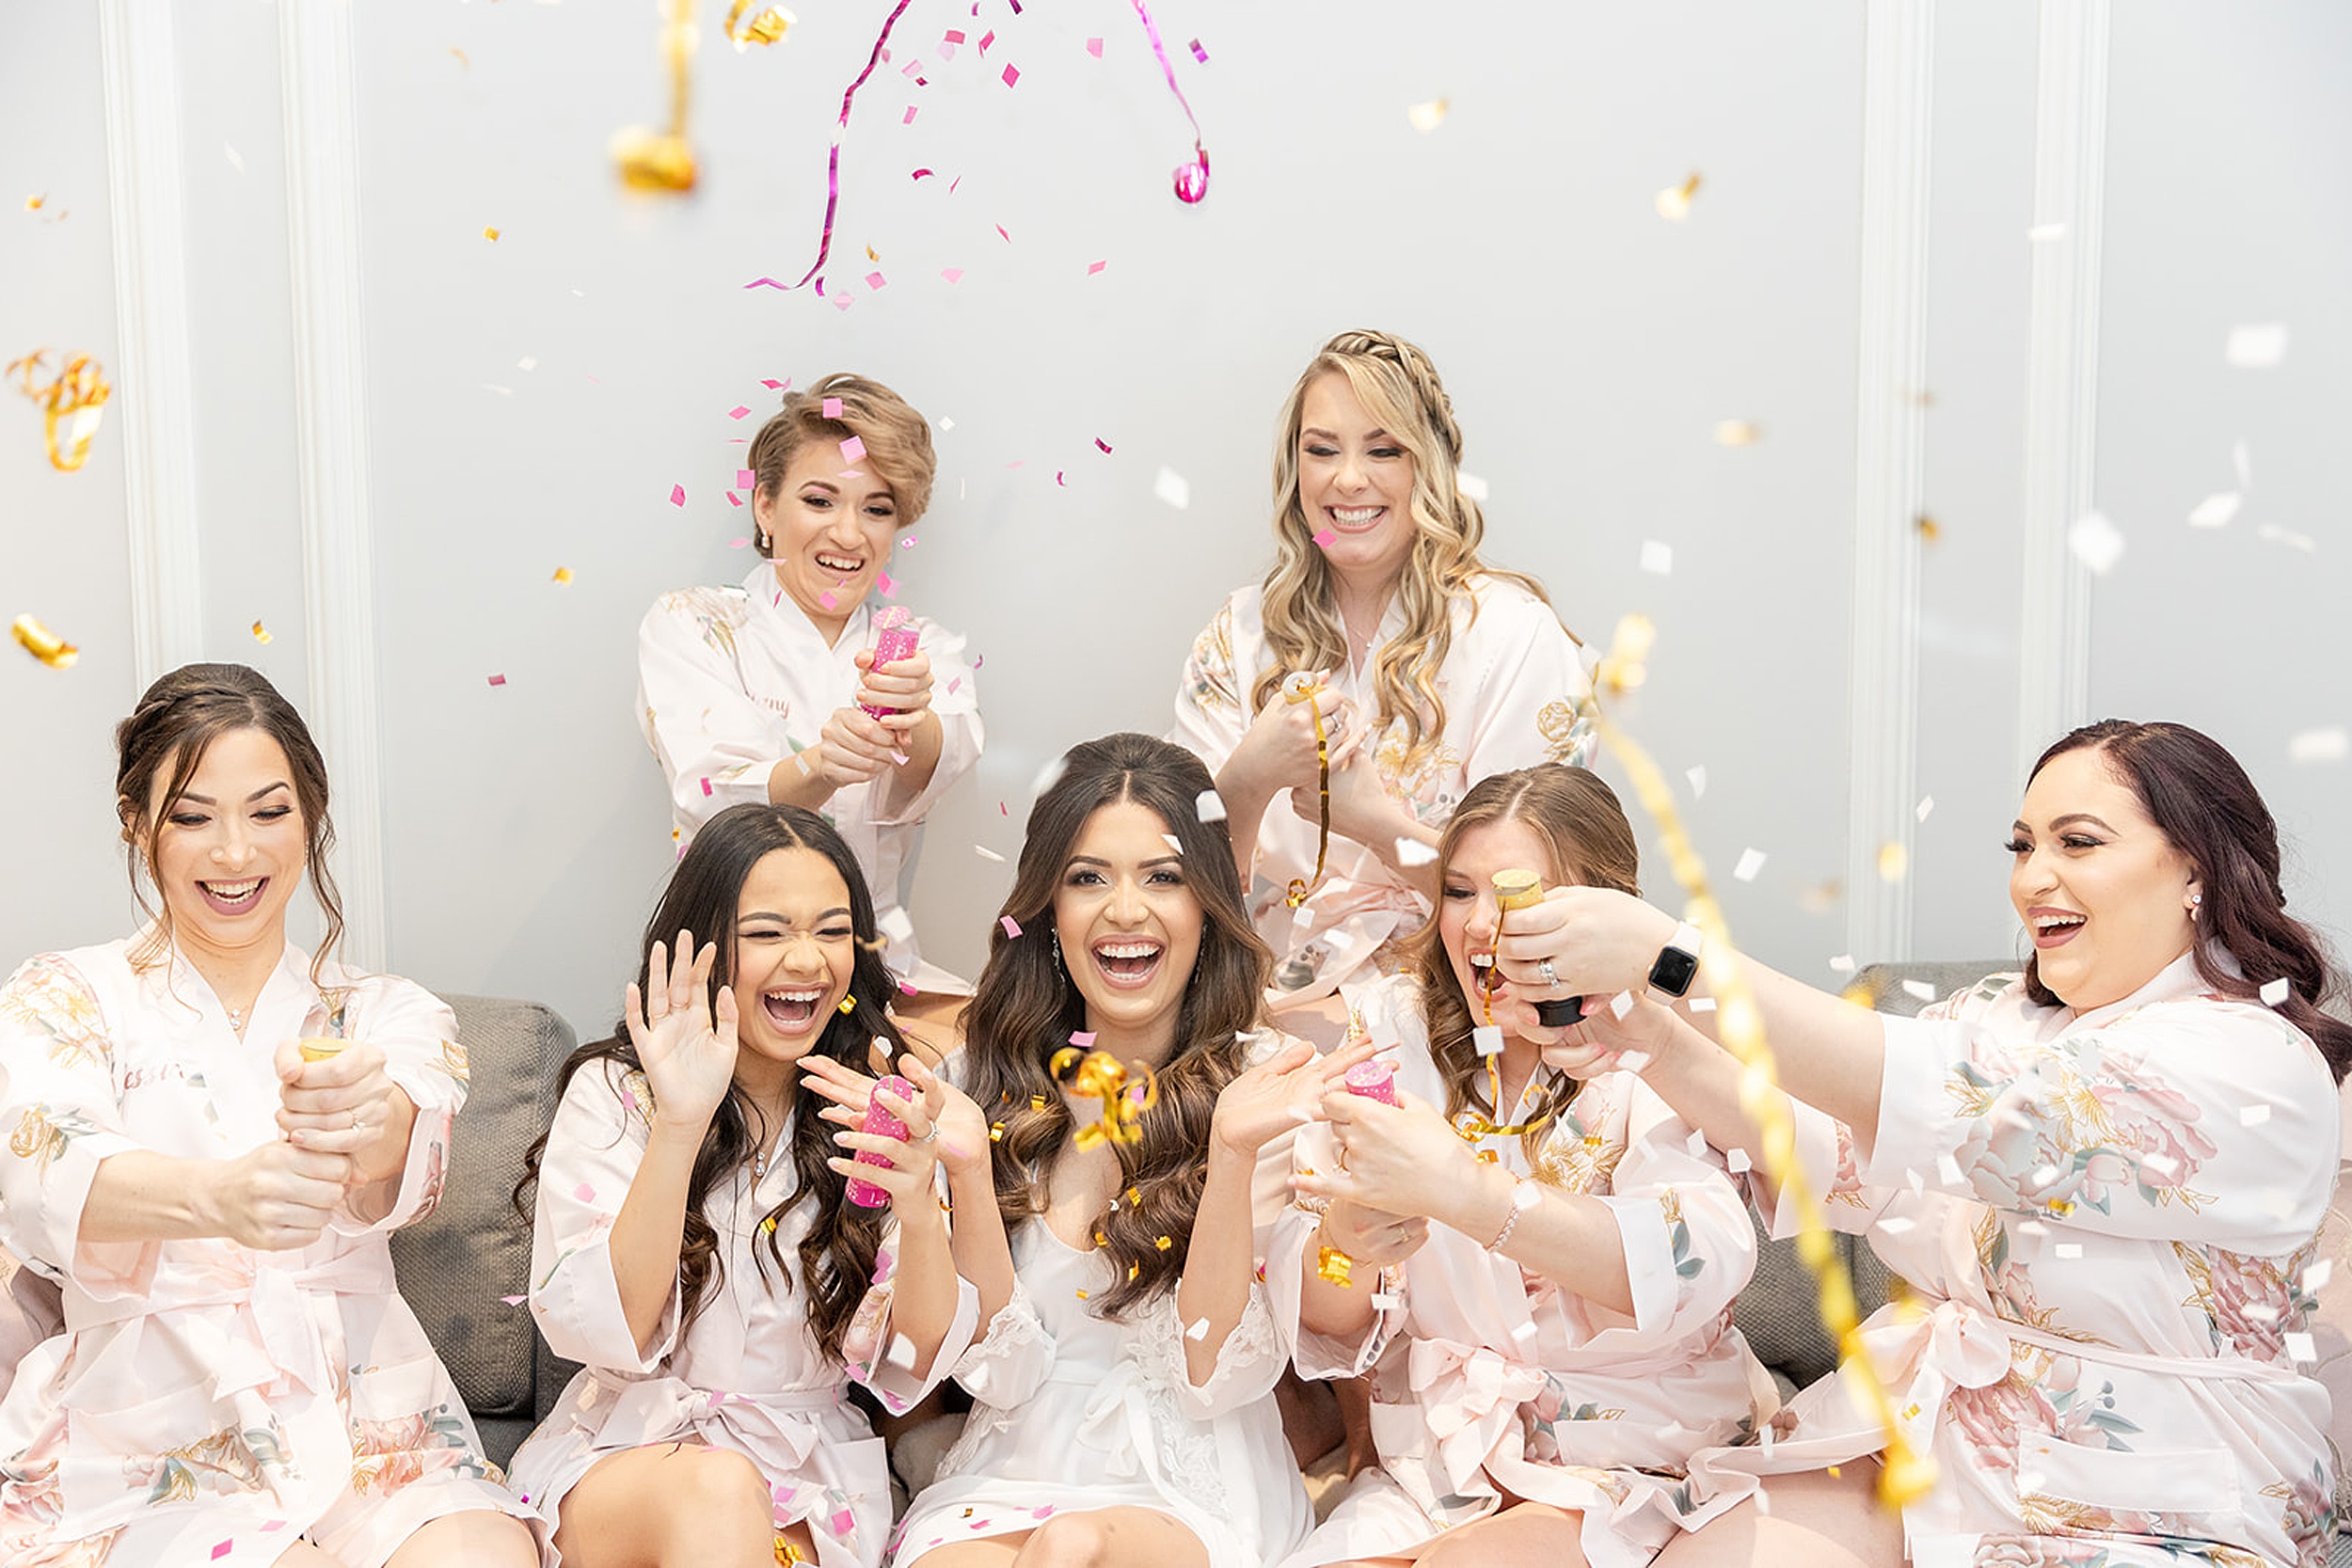 A bride sits on a couch with her bridesmaids as they pop confetti and streamers